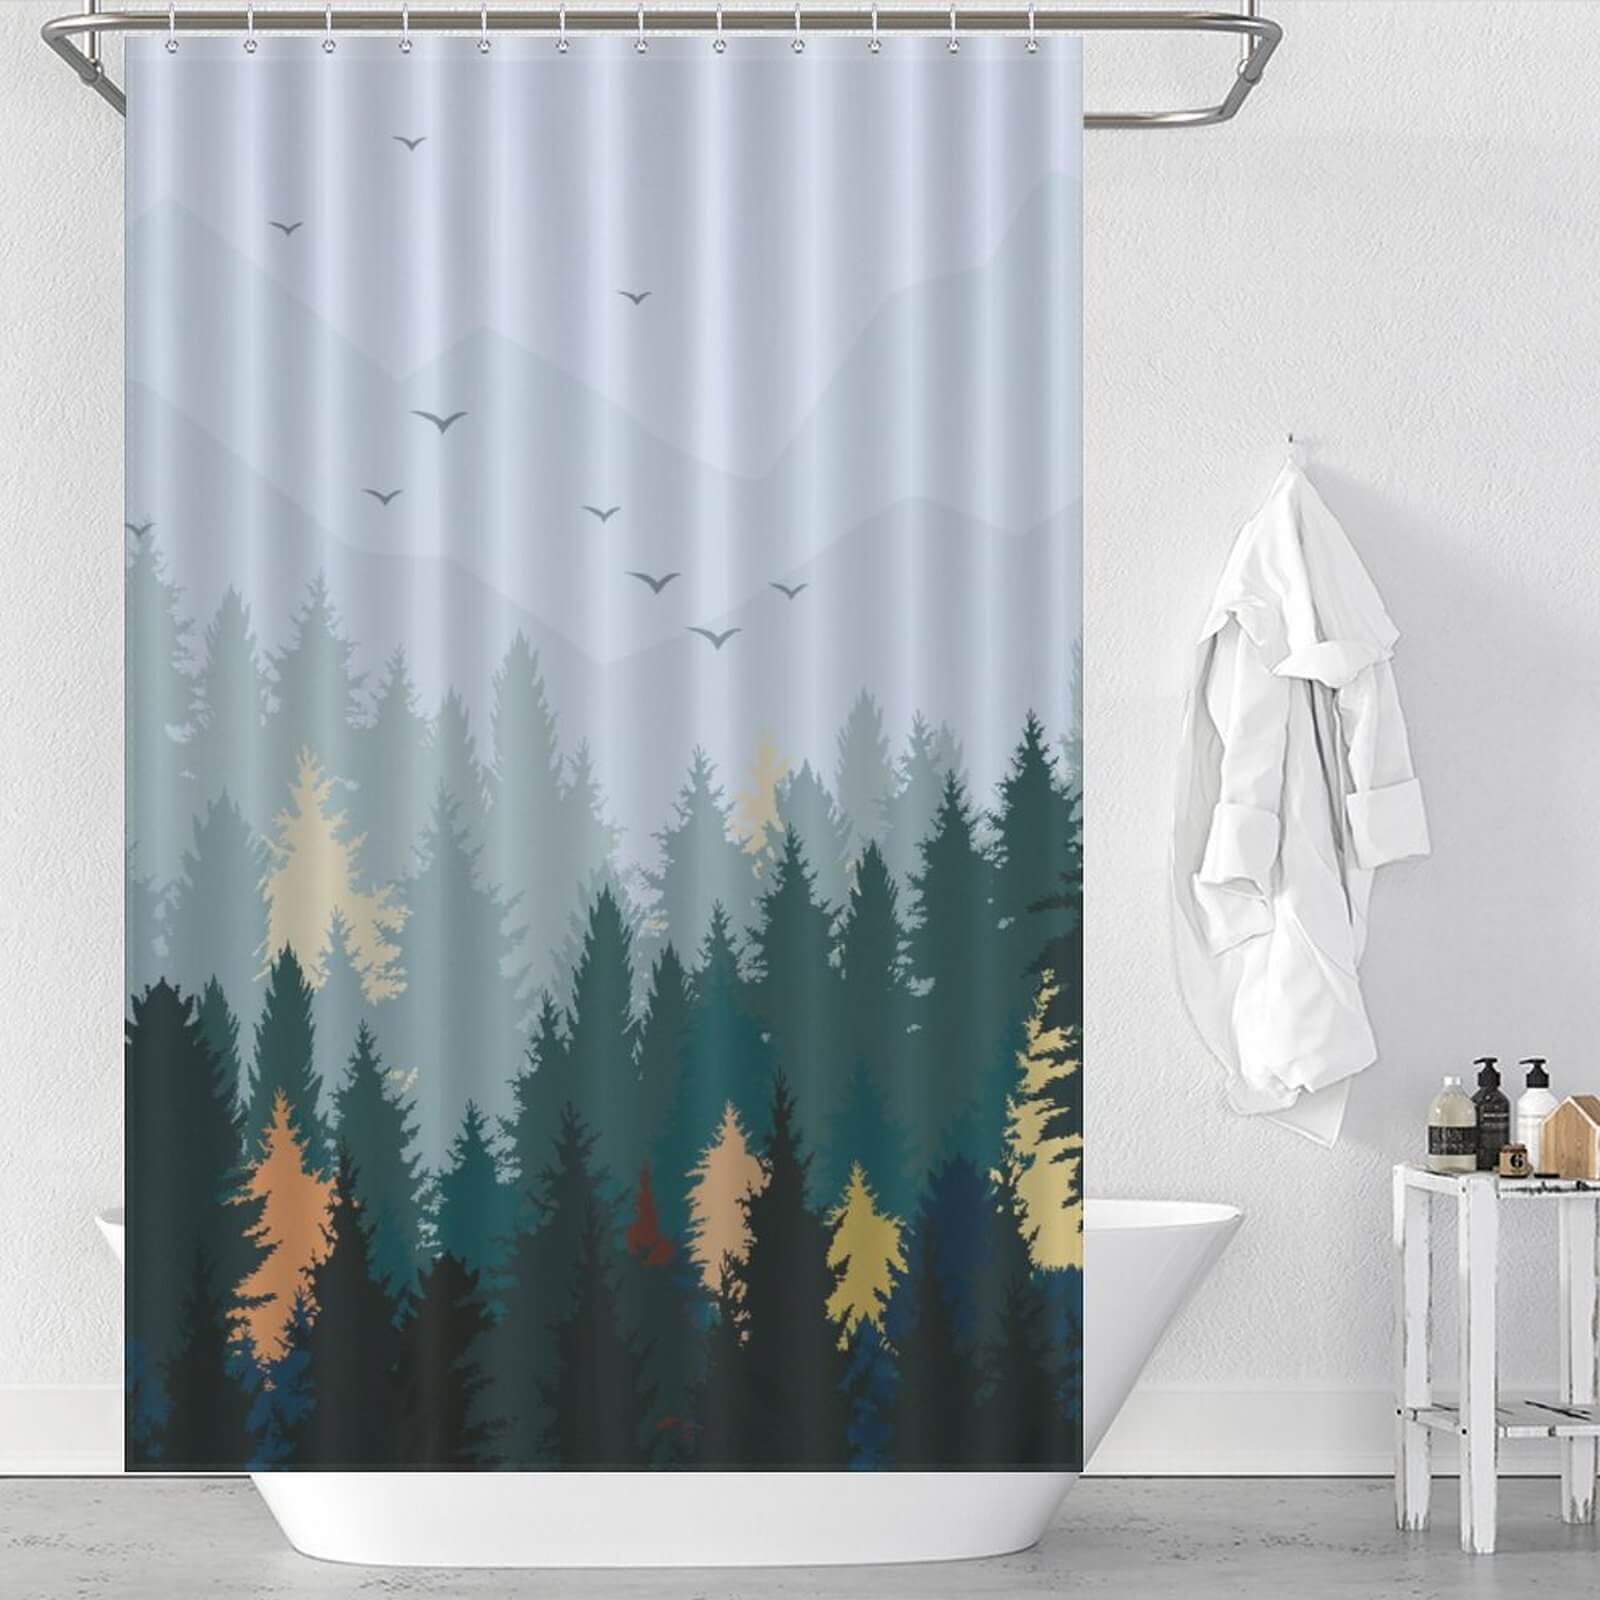 A waterproof Pine Forest Shower Curtain from Cotton Cat, perfect for bathroom decor.